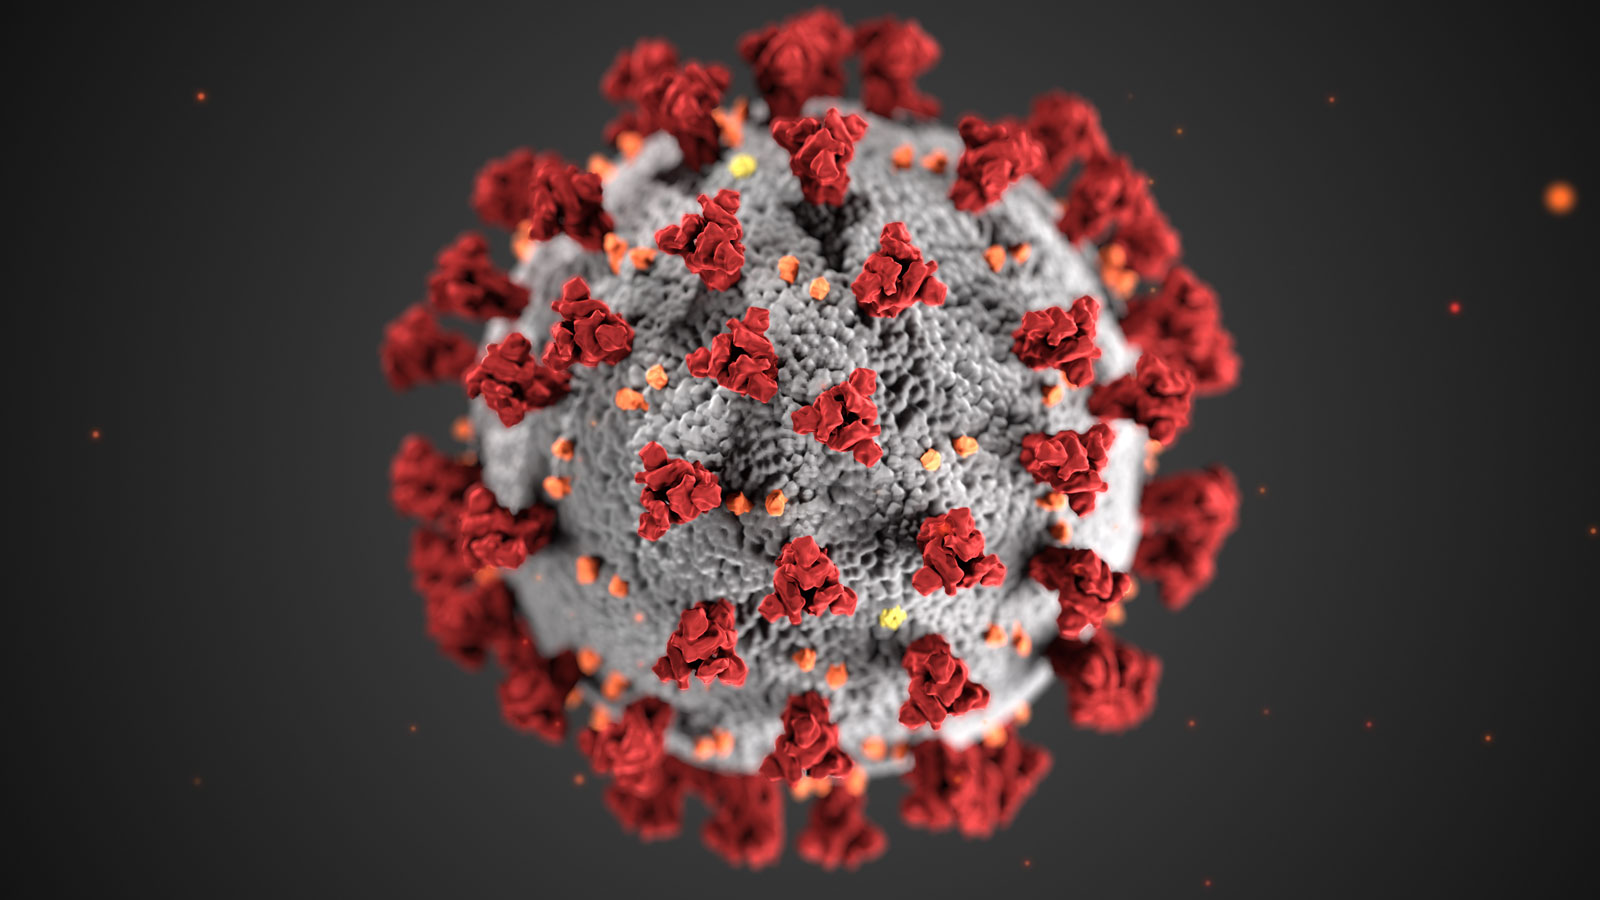 Coronavirus: The European Union stands by its Eastern partners